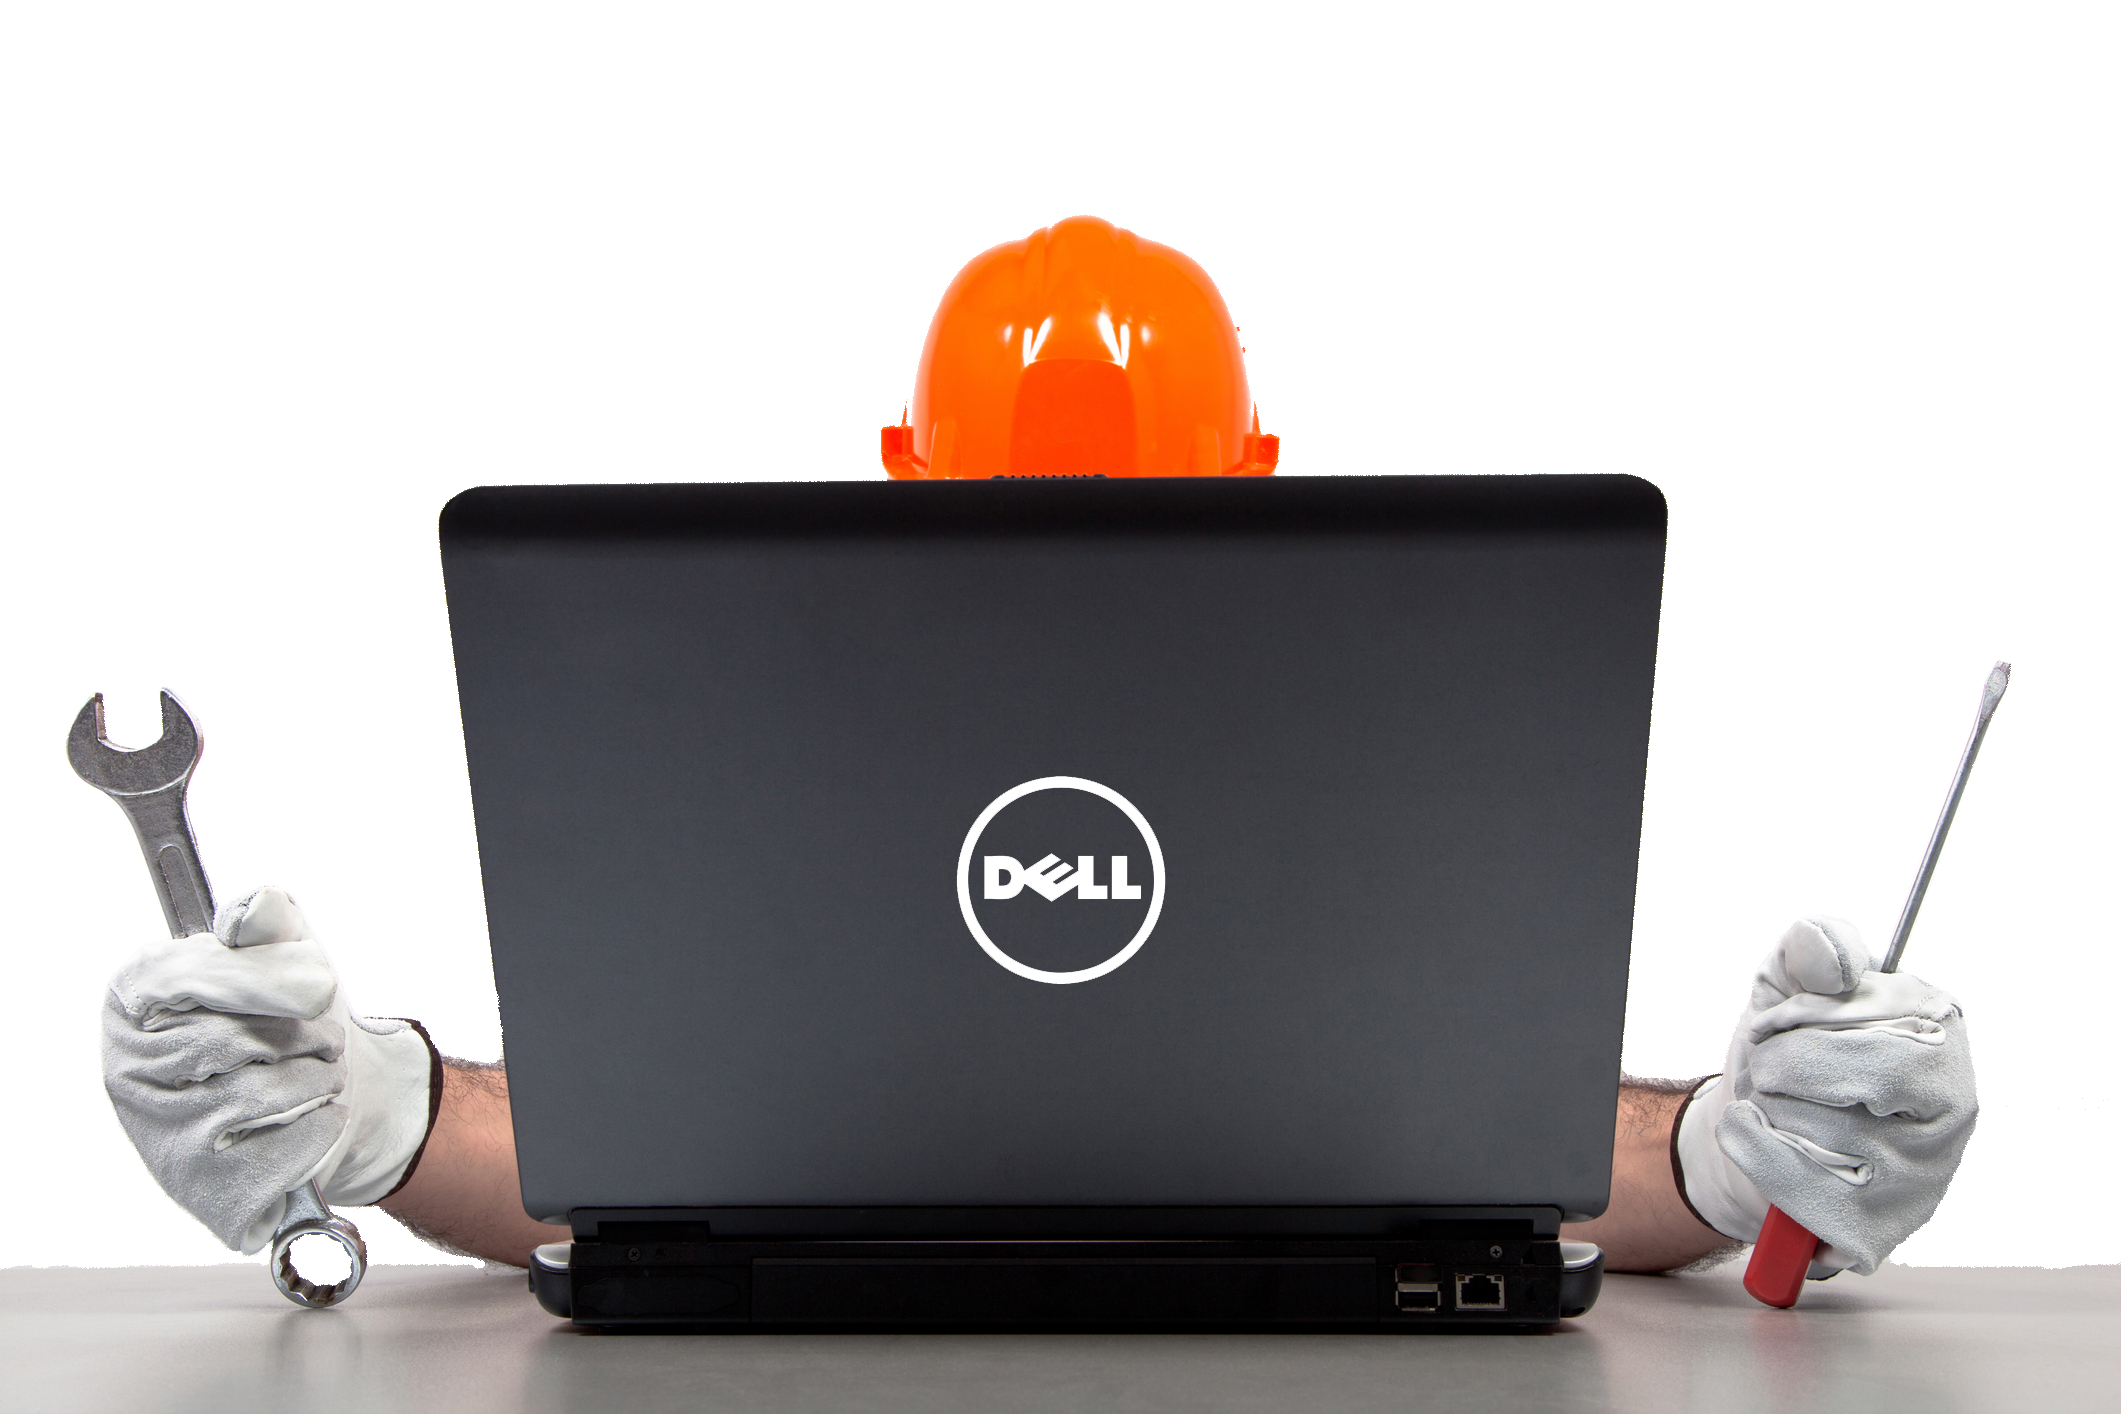 dell laptop service center in adyar, dell repair